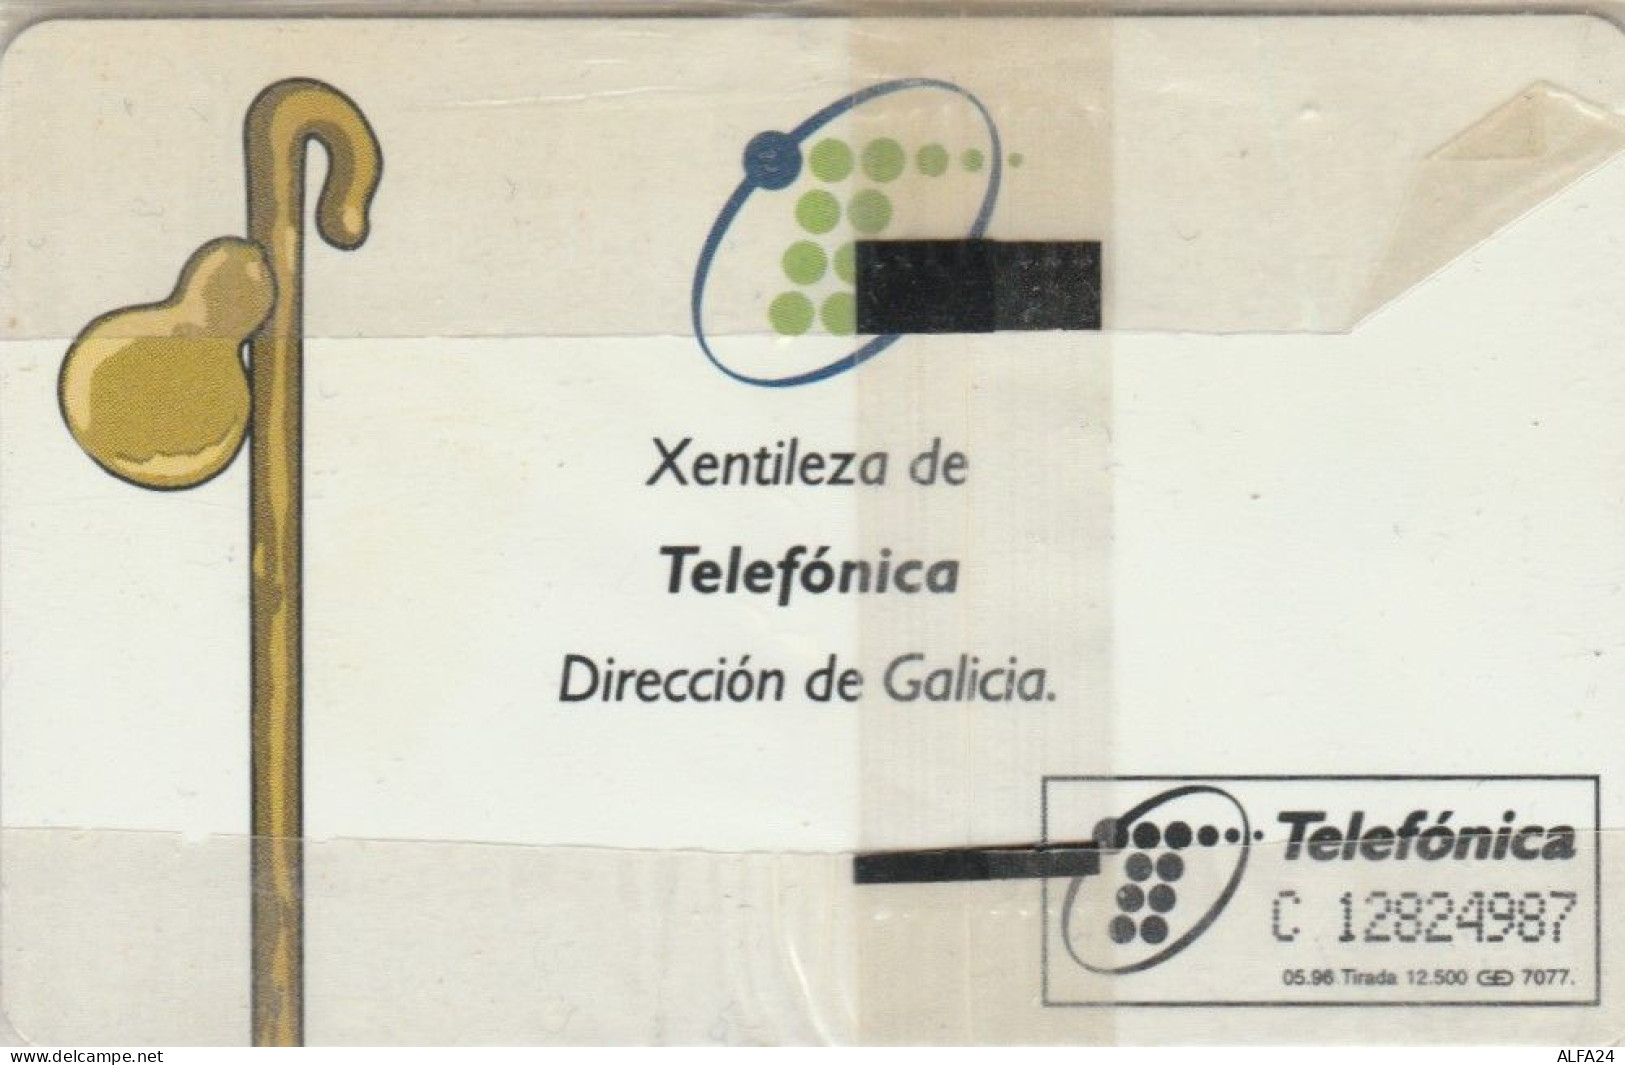 PHONE CARD SPAGNA PRIVATE TIR 12500 NEW  (E110.15.8 - Private Issues